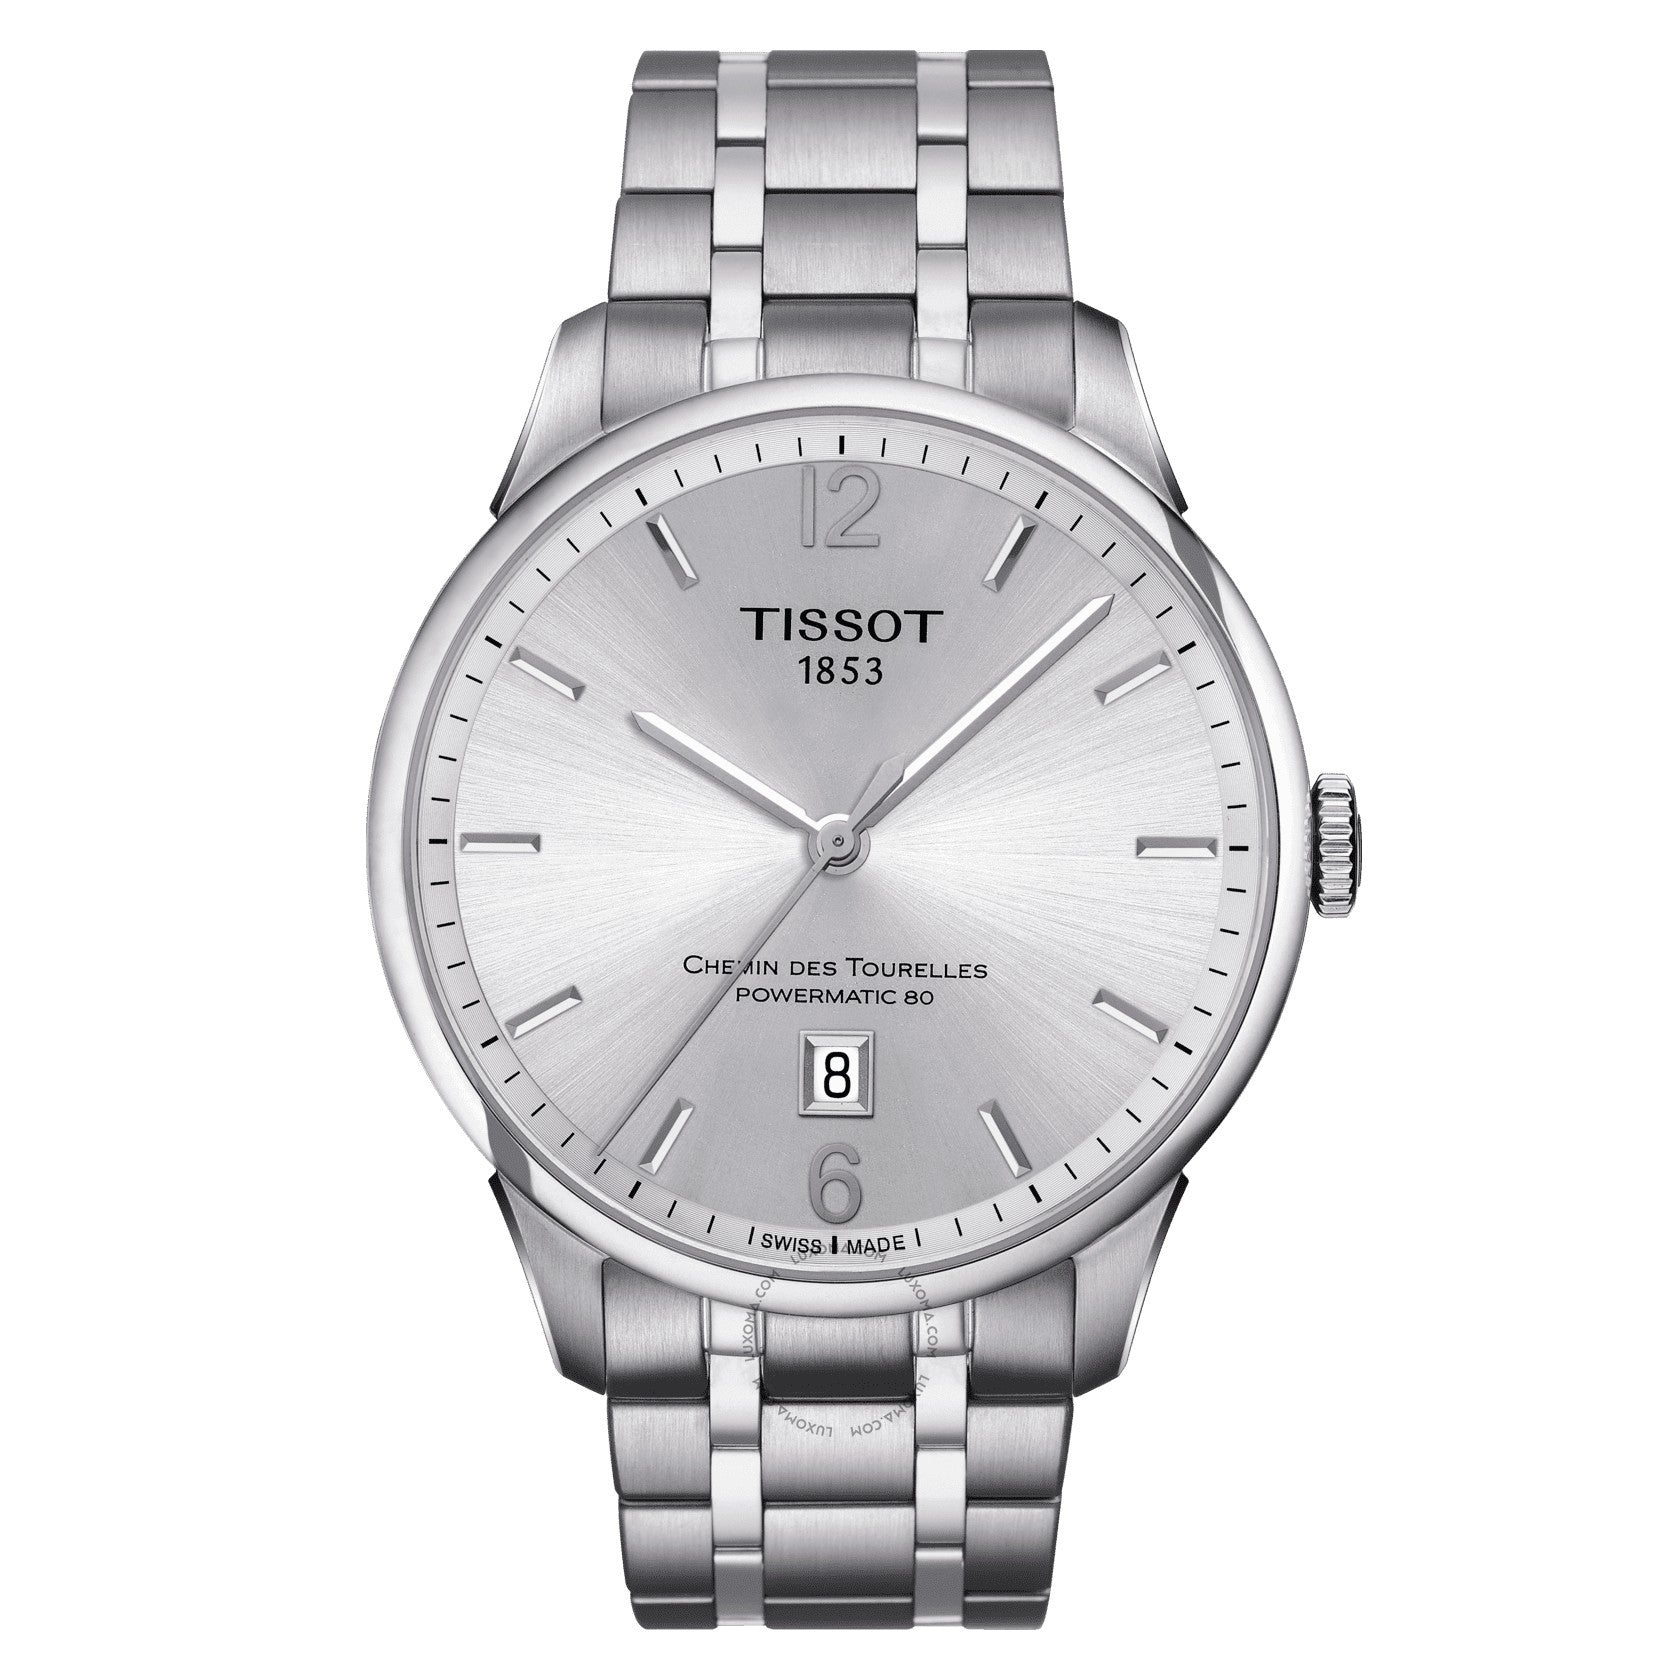 Tissot T-Classic Collection Automatic Silver Dial Men's Watch T099.407.11.037.00